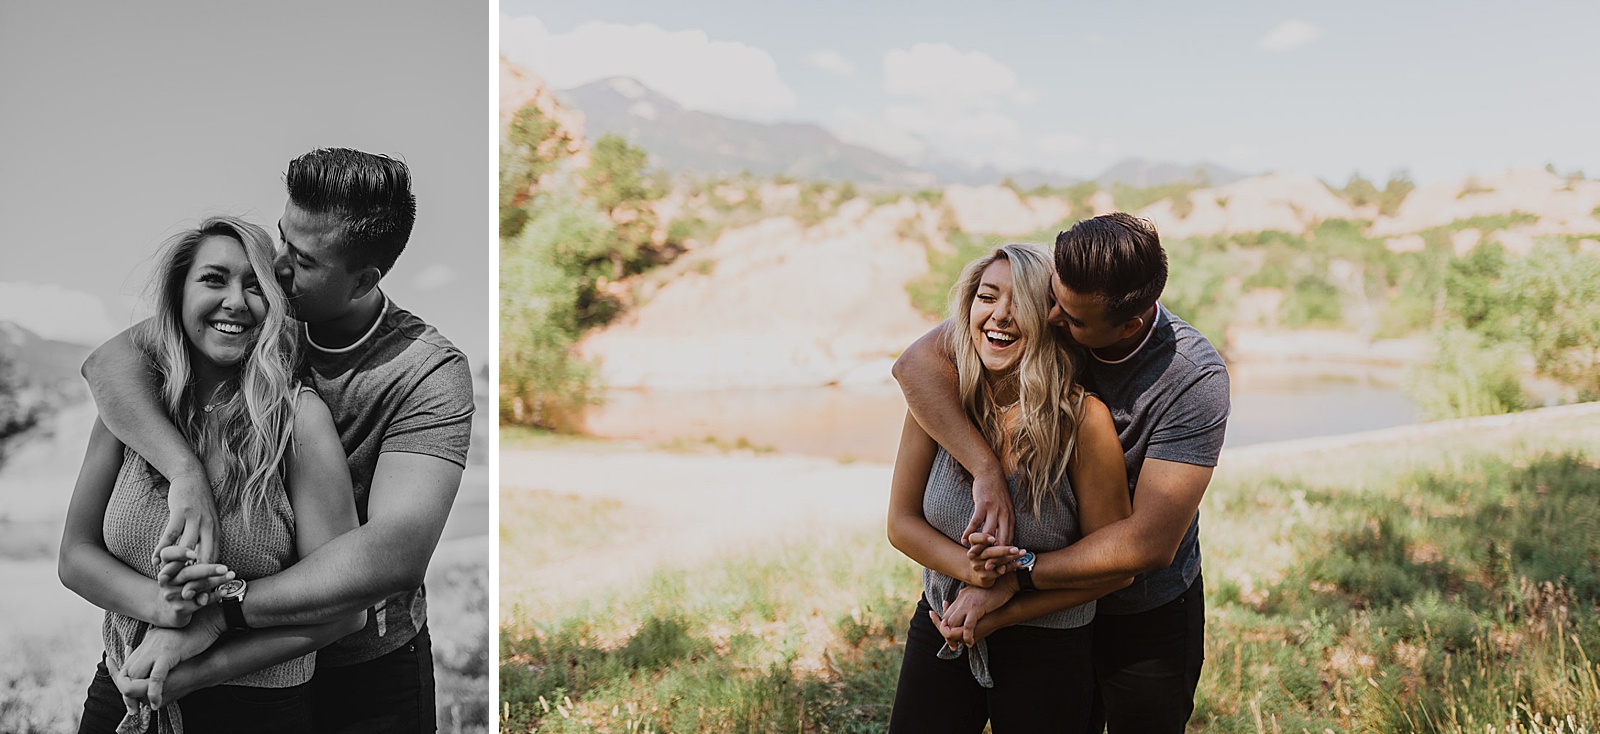 Laid back Colorado Springs engagement photos by Caitlyn Cloud Photography